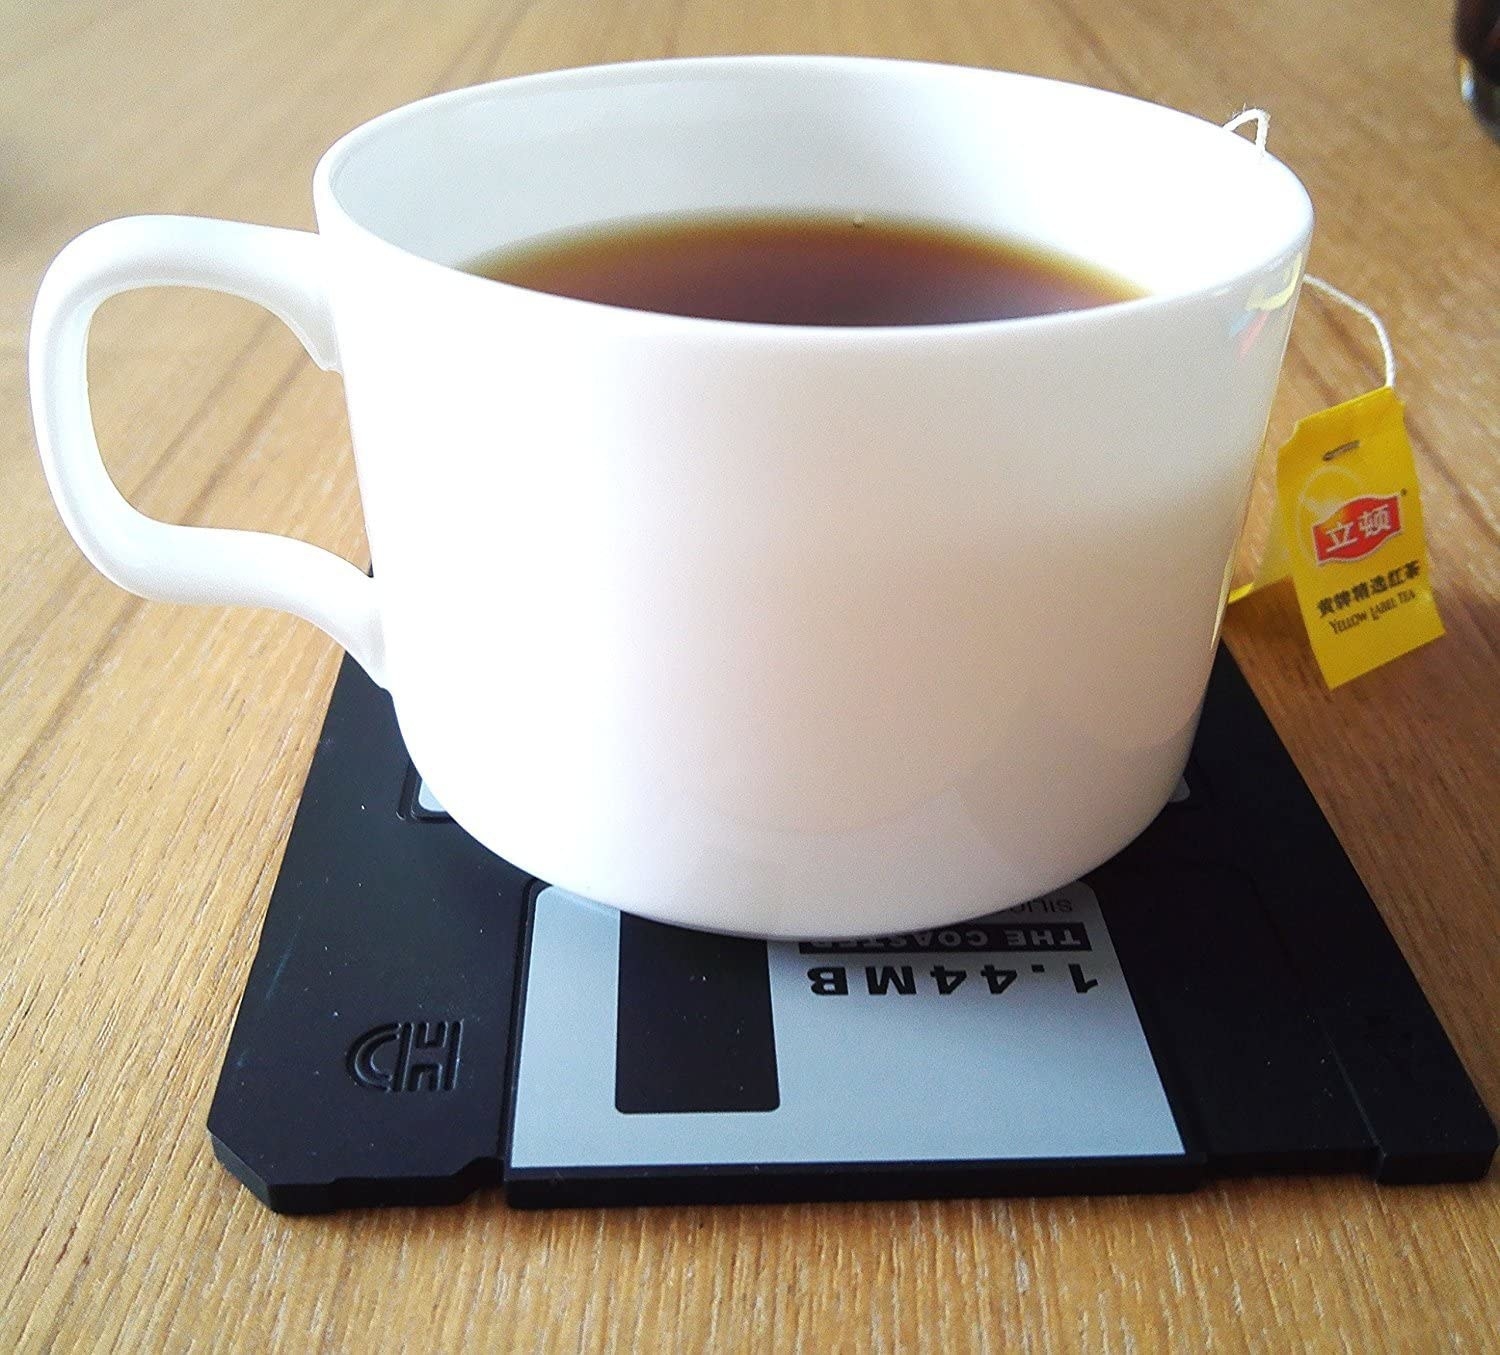 A cup of tea on a black floppy disk coaster 